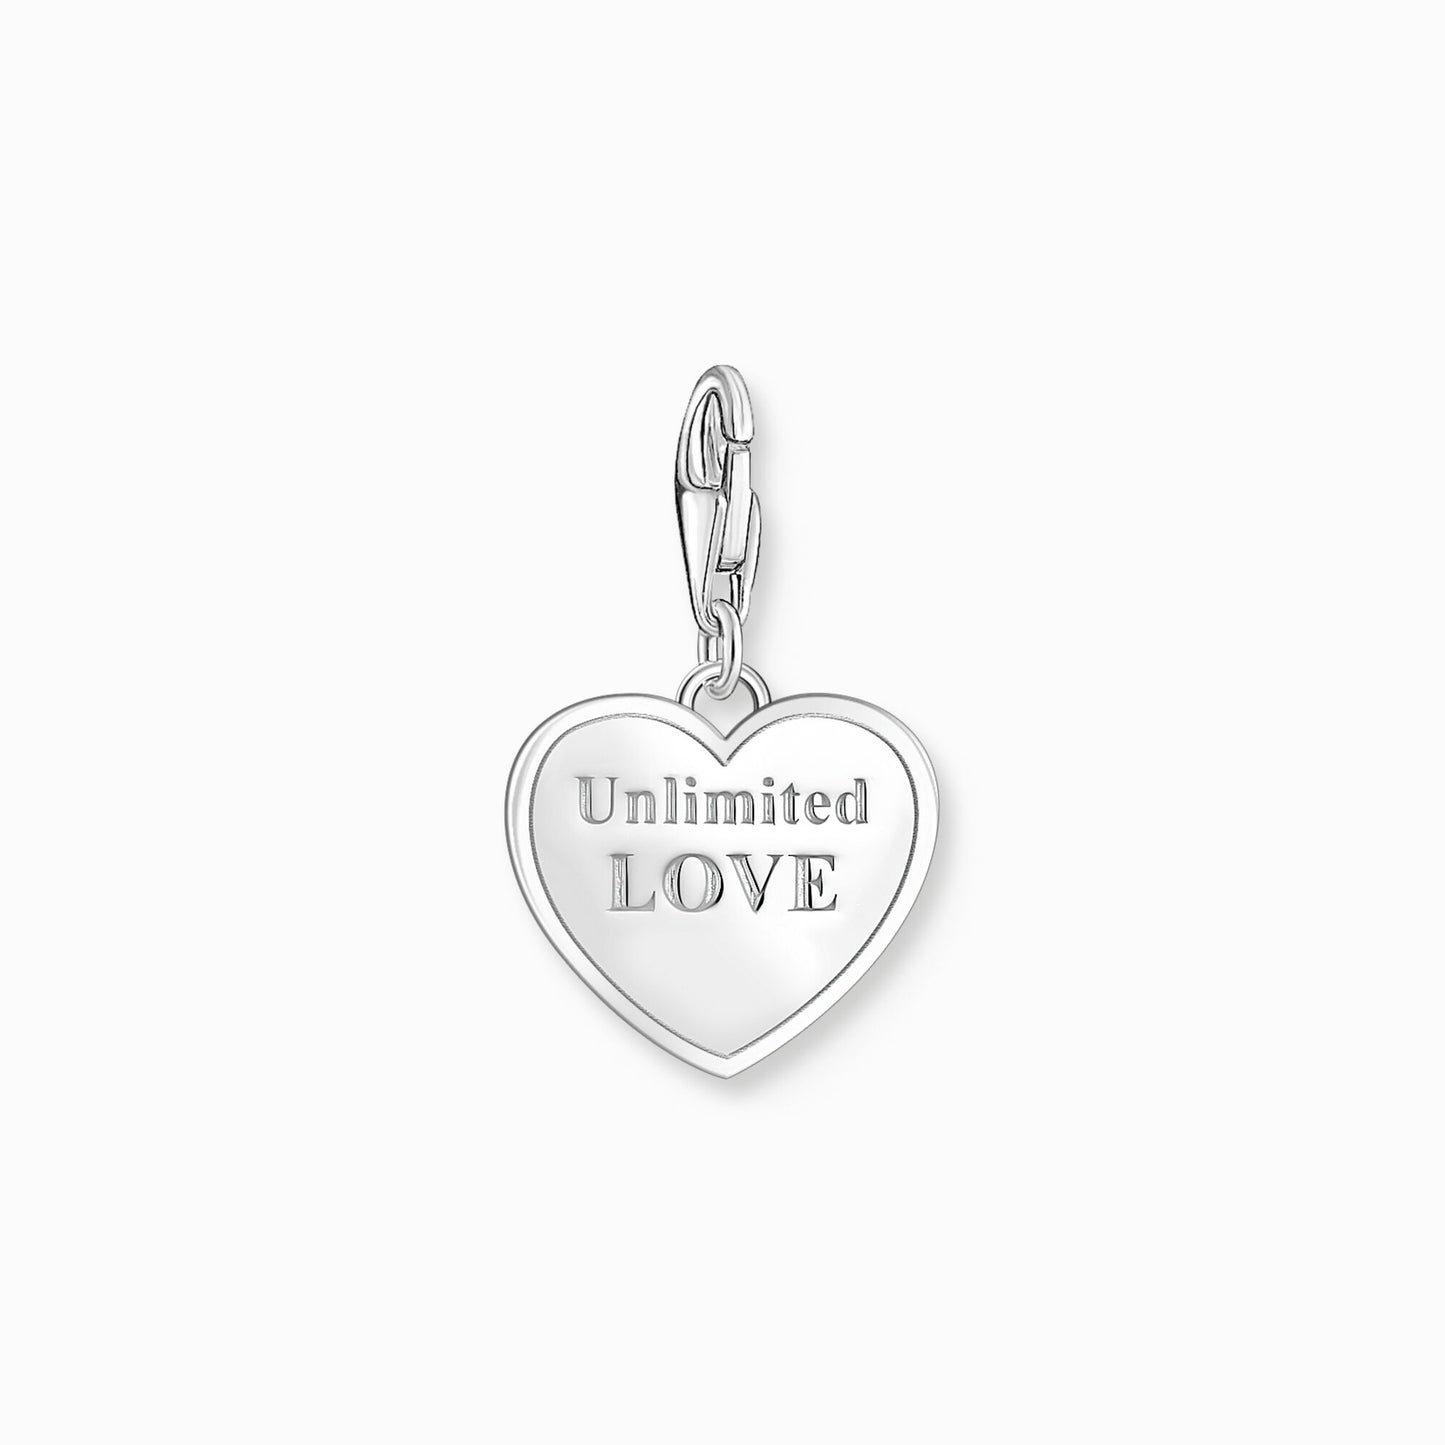 Thomas Sabo Charm Pendant Pink Heart With Best Mom Silver 2021-007-9